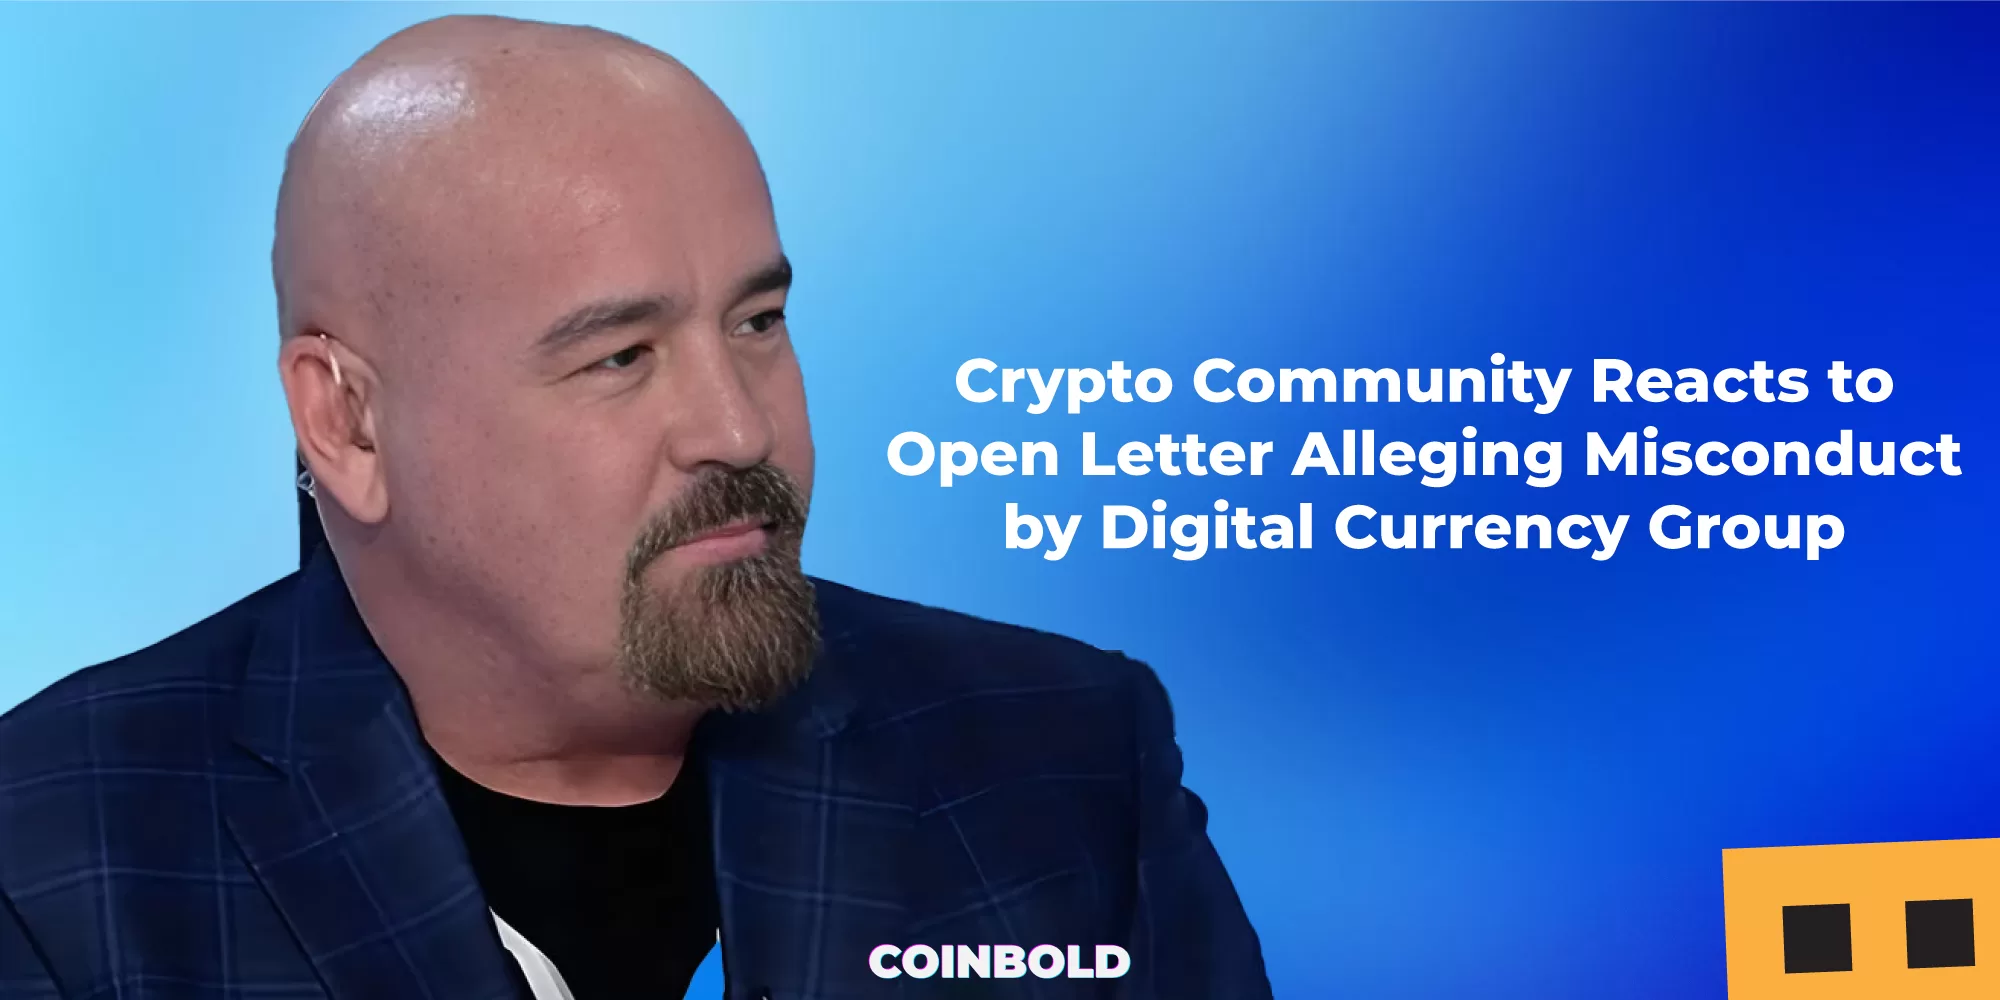 Crypto Community Reacts to Open Letter Alleging Misconduct by Digital Currency Group